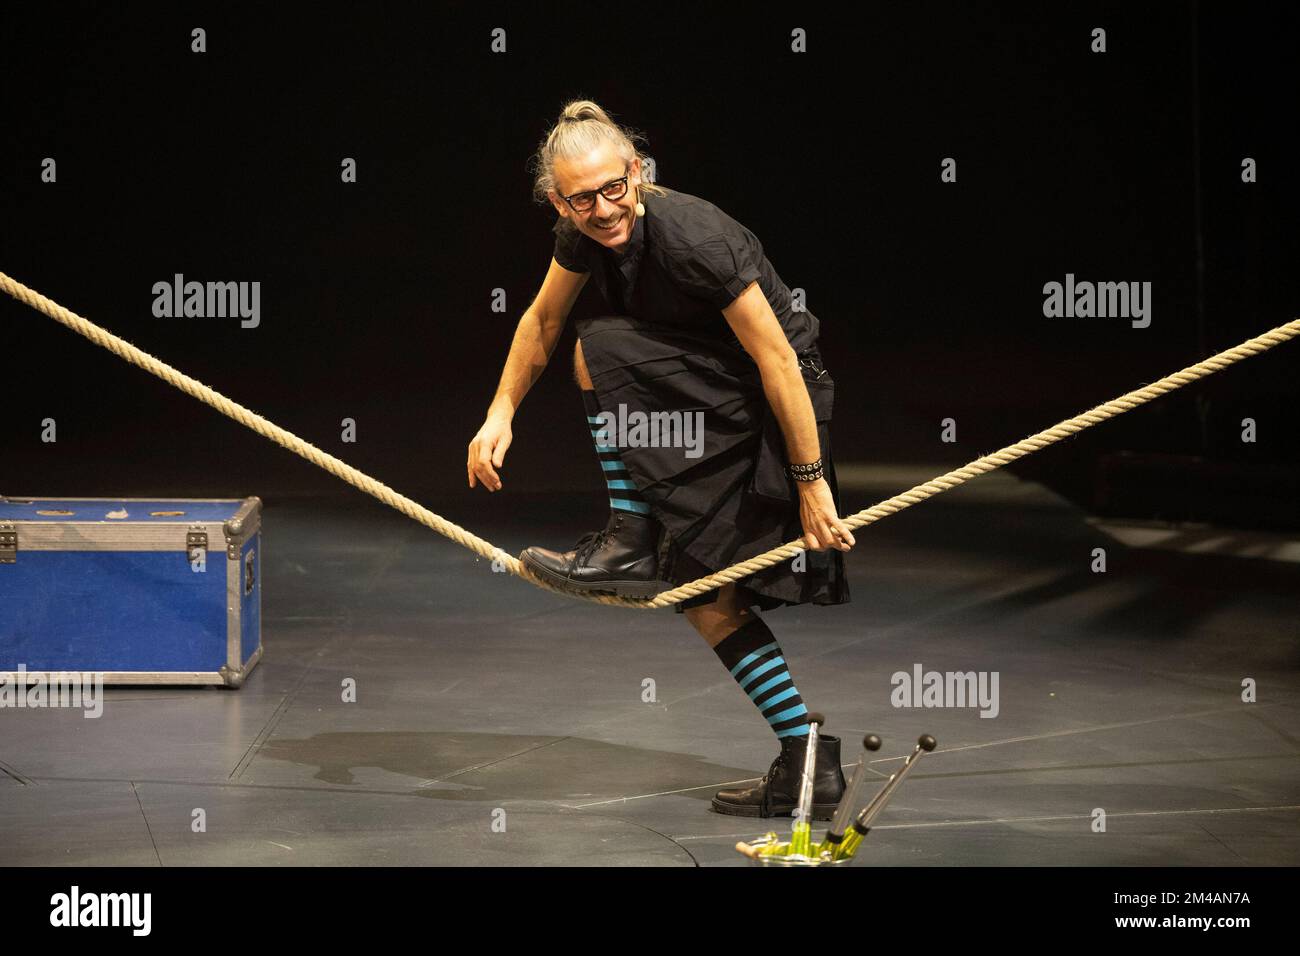 Andy SNATCH, Comedy, Low Wire, Juggling, The Circus Flic Flac will be  performing from December 16, 2022 to January 8, 2023 at the old  Gueterbahnhof in Duisburg, December 16, 2022 Stock Photo - Alamy